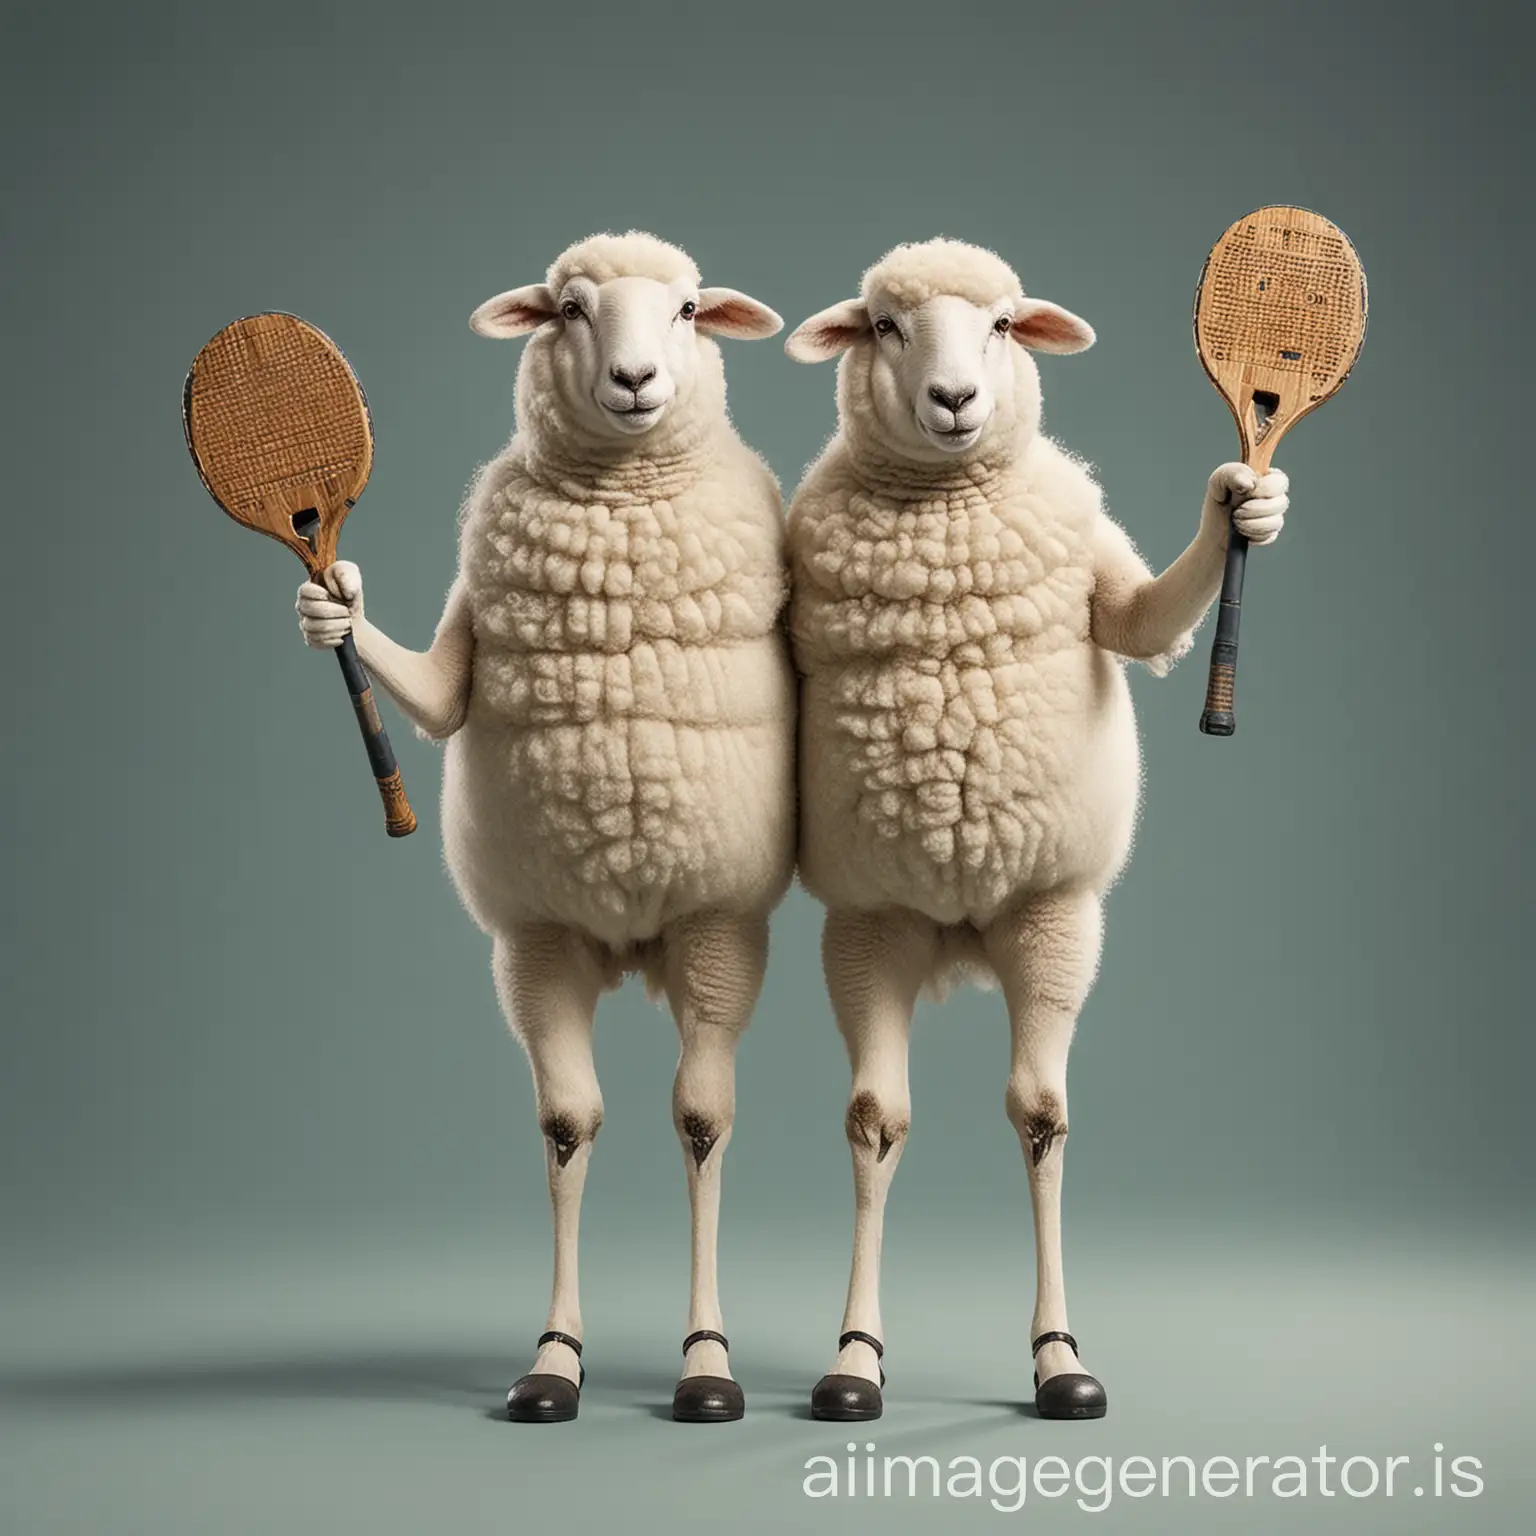 2 sheeps as human character (on 2 legs),holding padel racket